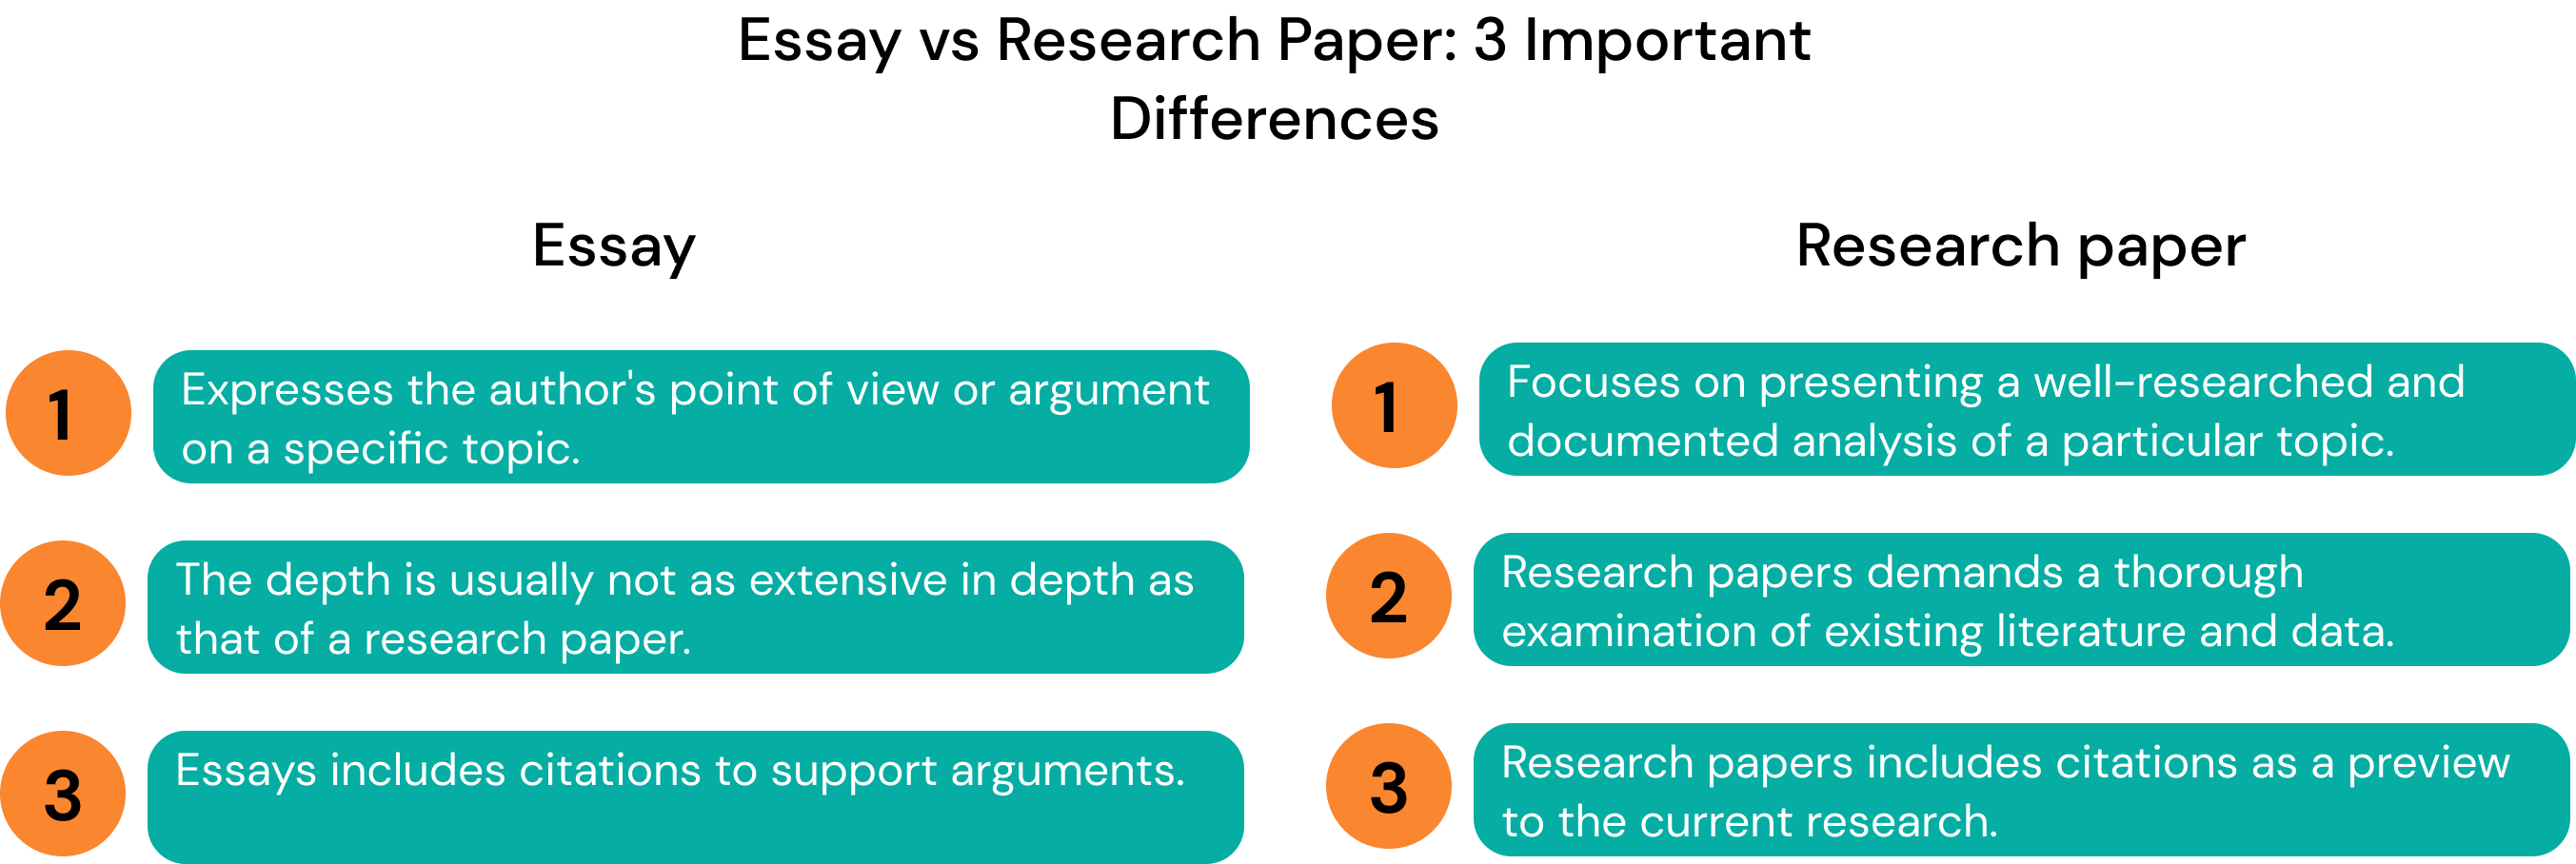 In most cases, you must do research to write a standard academic essay. And you must do the same for a research paper. Any essay writing requires an introduction, body, and conclusion, as does the research paper. Both are types of academic writing, so how can we differentiate between them? For these reasons, the “essay vs research paper” struggle is a common problem among students. To figure that out, we reached out to Nicolas Evans and Leticia Adamson for a little help. Nicholas is a professional writer at Customwritings.com, the department of ESL, and Leticia is the Head of the ESL program at Customwritings.com. They will sort out all the differences between the two genres. Editor’s note: The content of the conversation is saved without changes. Some particular sentences were reformatted as tables or lists for a more comfortable reading experience. Defining the Essay: Characteristics and Purpose Q: What is an essay format? What are its main distinguishing characteristics, and what role does it play in academic writing? Nicolas: I define an essay as a short form of writing with a clearly defined structure. The most canonic essay consists of an introduction, three body paragraphs, and a conclusion. So, any text that fits these criteria is, in fact, an essay. Leticia: Yeah, of course, depending on the size, there can be much more than three body paragraphs. However, if we speak about formal indexes, I would also add the mandatory presence of the thesis statement and the variety of sub-genres. Nicolas: They do not make the definition less confusing (laughing – ed. note), but I see where you are coming from. The problem is that the essay has a uniform structure and hence has many similarities with other genres. Anchor: In academic writing, an essay serves as a counterpart and primary source for all other genres. It is the most uniform training ground for students, giving the basis for any writing type they will need throughout their lives. Leticia Adamson, PhD in English Literature, Head of ESL program at Customwritings.com For example, here are some genres that are similar to essays: Opinion editorial (used in magazines) – opinion essay Article – expository essay (both neutrally explain the topic) Research paper – research essay Leticia: Okay, okay, then what about that definition: “An essay is a fundamental variative writing genre that has three mandatory but flexible parts (introduction, body, conclusion). The final formatting of these parts depends on the essay’s content.” Nicolas: Yes, I like this one. I guess that is the closest we can get to the essay definition. The Anatomy of a Research Paper Q: What is the most critical difference between an essay and a research paper? Why do research papers differ so much? Leticia: Oh, I have an easy answer for that question. The main difference lies in the content depth. Let me show how the “anatomy of a research paper” affects its depth. I will emphasize the points that are not present in the academic essay genre (the emphasized points are highlighted in bold – ed. note). Research paper components Their purpose Abstract Gives a summary of the research and explains the methodology and key findings. Introduction Presents the topic, research questions, and basic background information. Outlines the purpose and significance of the research. Literature review Examines the findings related to the research topic and explains at what point the collective research stands at this given point in time. Working theory and framework Presents what methods were used in the research. Discussion The main section that guides the reader through the research process. Results and conclusion Interprets the findings of the research, outlines key restrictions, and proposes the next steps. Nicolas: Yeah, it’s a good way to present the research paper vs essay contrast. I can say that the main distinctive feature of the research paper is a more conscious approach to methodology and analysis. Anchor: When you write the essay format, you mainly research to find the arguments or counterarguments to a particular position. Or you do not need any sources at all; you just lay out your personal thoughts. When writing the research paper, the author should not have an initial perspective on the question. Their goal must be to find out what exists out there. Nicolas Evans, professional writer at Customwritings.com Comparative Analysis of Structure and Content: How Different Is Different? Q: It is clear that the two genres have distinctive variability. But can you name a specific difference between a research paper and an essay in the structure and content? Nicolas: I can name quite a few, actually, not just one. Leticia: Yeah, me too. We can name and explain them one by one. Shall we? Nicolas: Sure, ladies go first. Balancing depth and brevity in writing Leticia: Well, obviously, the depth of the research is a crucial point here. We mentioned it before, but I would like to elaborate a little bit more. You are not expected to say something completely new in your field when you write an essay of any type. However, when you write a research paper, you must perform a comparative analysis of available information and present your findings in a new light or propose a new combination of information. Anchor: In essay writing, you have to provide the originality of ideas but not the originality of your findings. The same does not apply to research papers. Leticia Adamson, PhD in English Literature, Head of ESL program at Customwritings.com Here is a short example: If you write a research paper about the greenhouse effect, you must explain at what point the studies are now and the newest findings or decisions around that problem. If you write a research essay, your assignment questions will most often concentrate on what the greenhouse effect is and its consequences. Managing the content’s goals and the role of sources and evidence Nicolas: One more difference between essay and research paper I want to tell about lies quite close to what you said, Leticia. You mentioned comparative analysis, and that is actually the primary goal of the research paper. In research papers, sources and evidence play a more important role compared to essays. In professional research, the structure and format follow the lead of the findings from sources. Leticia: Yeah, and in the essay, sources and evidence are not structured THAT much, right? Nicolas: Yes, the research essay has a clear and strict structure, too. However, as the college professors usually deliver the task, it is still student-centered. A typical academic research essay is about showing the student’s work. A more professional research paper is about aiming to join the academic community. Crafting a strong thesis statement Leticia: One more important difference is how you work with a thesis statement. In essays of any type, a thesis statement is simply a brief statement of your main idea. However, a thesis statement for a research paper is a hypothesis you believe can be true. It may or may not be true; you will find that out after doing the research. You do the analysis, collect the sources, and see whether it proves to be true. When you write an essay, you first do the research and then come up with a ready-to-go thesis statement. Methodological Differences: Research vs Opinion Q: Are there any writing tips for developing the correct methodology for both genres? Can regular students switch from essay writing to more advanced research paper writing? Nicolas: Yes, of course, they can. First, let’s talk about methodological differences. Methodological differences Nicolas: The methodology of a research paper requires an understanding of how to collect data, what proves its validity, and what the sample and the scope of the research are. In research writing, you cannot simply state that something is true because someone famous said it; that is not considered a valid argument. Here are 23 step-by-step tips on writing a research paper, and here is an article about writing a strong research question. You don’t need to follow all these steps in essay writing meticulously. Transitioning from essays to research papers Nicolas: As for the transition, I also have only one crucial piece of advice here. You can effectively transition from writing essays to research papers with practice. Learn what arguments are weak and what are strong; learn what types of research methods exist. Learn about quantitative and qualitative research, and eventually, you will be ready for professional research papers. Practical Tips for Writing Essays and Research Papers Leticia: Oh, I actually have a few practical tips on how you do that. Here they are: Learn and practice one new skill at a time. For instance, you can learn quantitative research methods for essay writing, too. It will gain you some more points for the assignment, so that is a good way to kill two birds with one stone. Pay attention to the sources when you collect them. All peer-reviewed articles you use for your papers are, in fact, research papers. Carefully learn and write down the structure, argument logic, or some particularly good methods. You can use it all as your inspiration source. Try going the extra mile for yourself. If you want to join a scientific community in the future and work at a university or research center, start practicing now. To effectively transition from writing essays to research papers, choose your favorite topic and pretend you are a professional researcher. If you have good research ready, you can even reach out to your professor and see whether you can publish or further develop it. Three Most Frequently Asked Questions Q: What are the fundamental differences between a research paper and an essay? Nicolas: Fundamental differences are the structure, the depth of research, and the purpose. Q: How does the structure of a research paper differ from that of an essay? Leticia: The structure of a research paper has such mandatory parts as an abstract, literary review, explanation of methodology, discussion, and findings. An essay consists of an introduction, body paragraphs, and a conclusion. Q: What are the key elements to consider when writing a research paper or an essay? Nicolas: The key elements to consider are a well-defined thesis statement (research question), structure, and audience awareness.